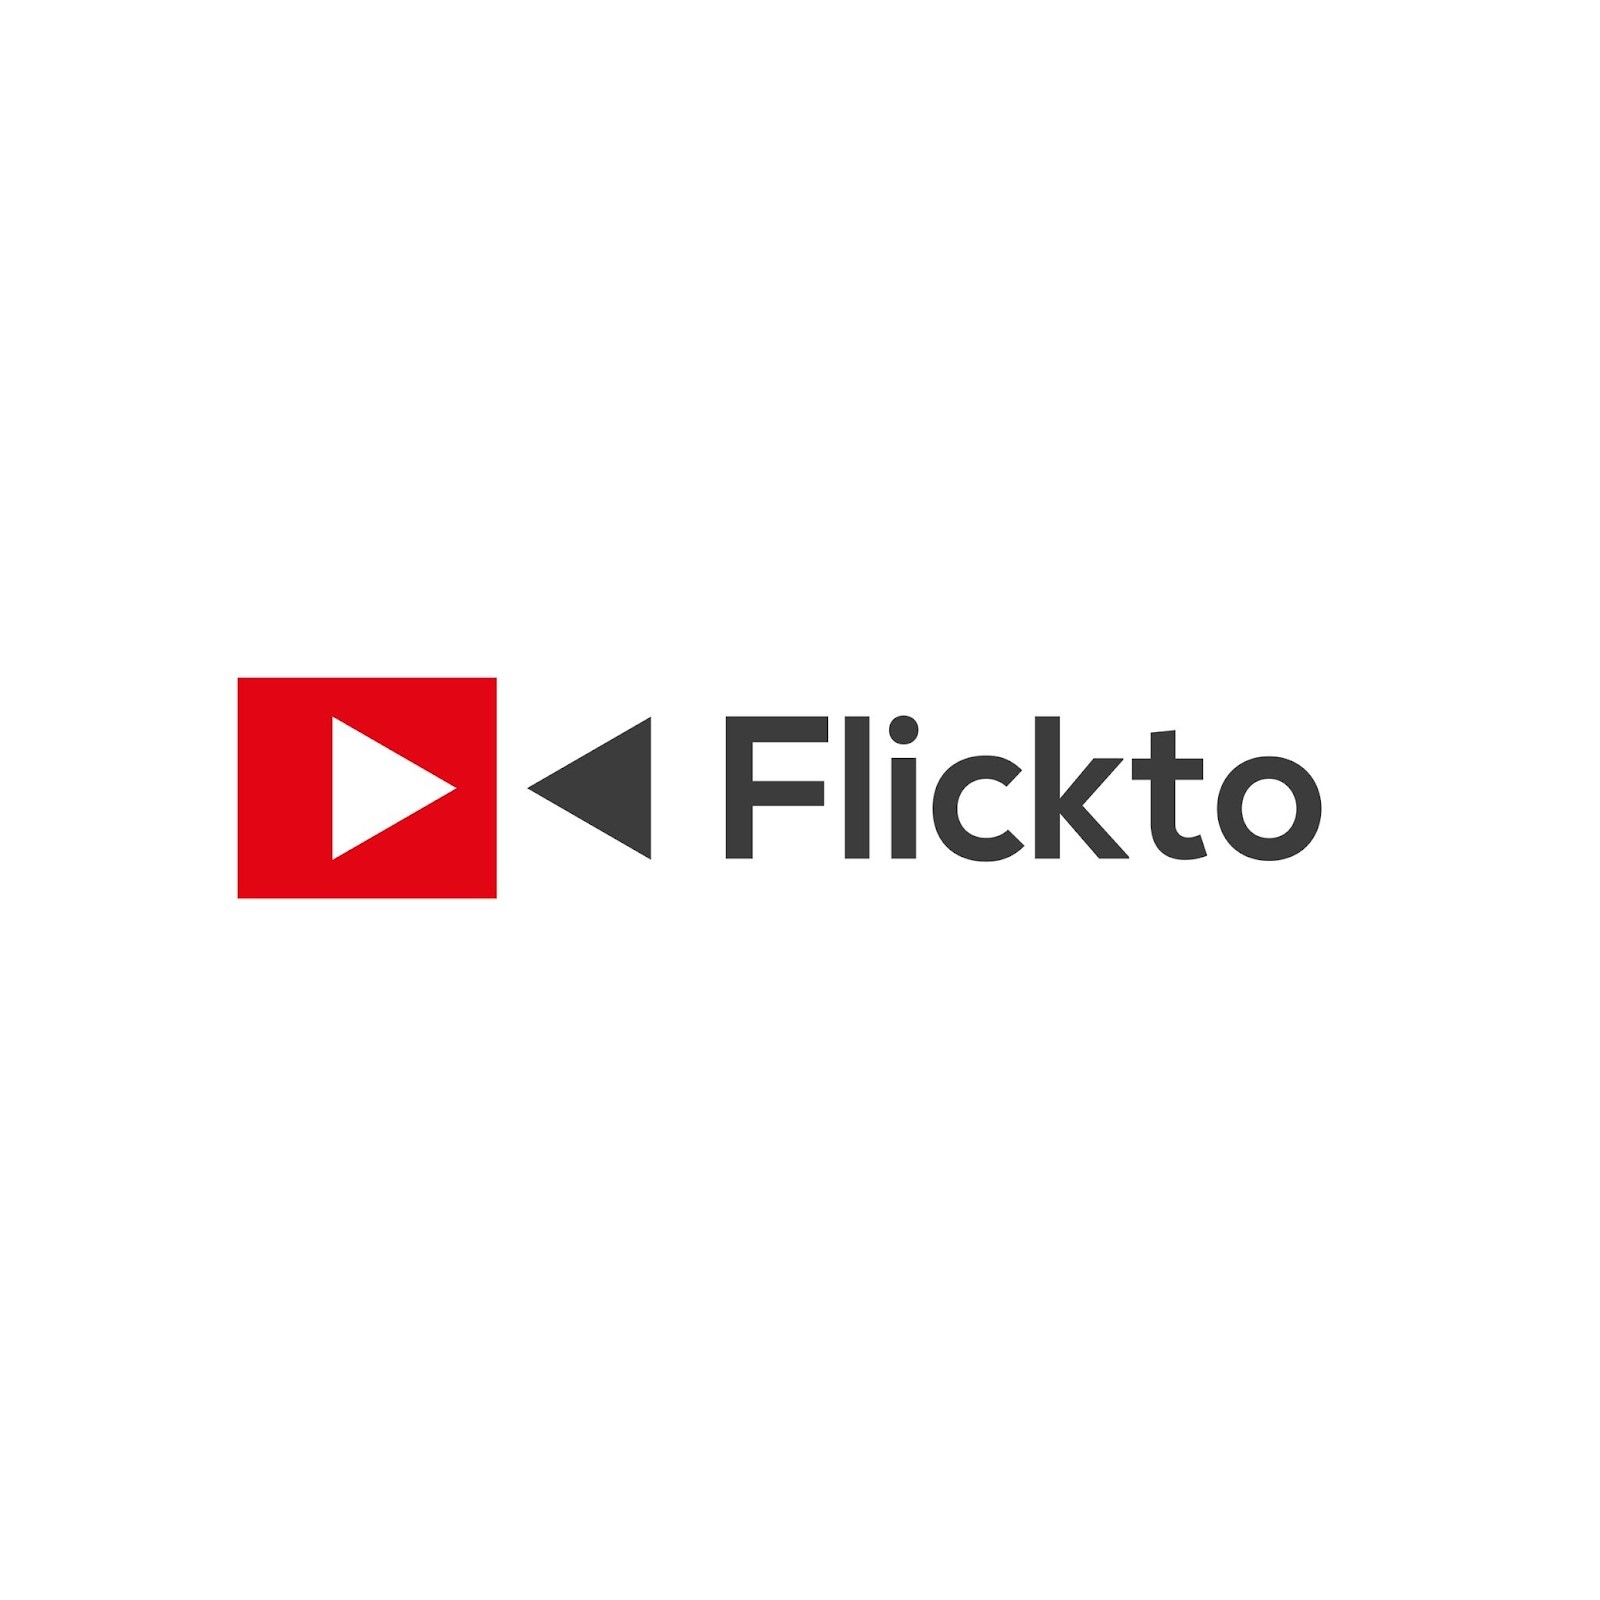 Flickto Public Round Now Open As $170,000 Worth Of Tokens Have Already Been Sold